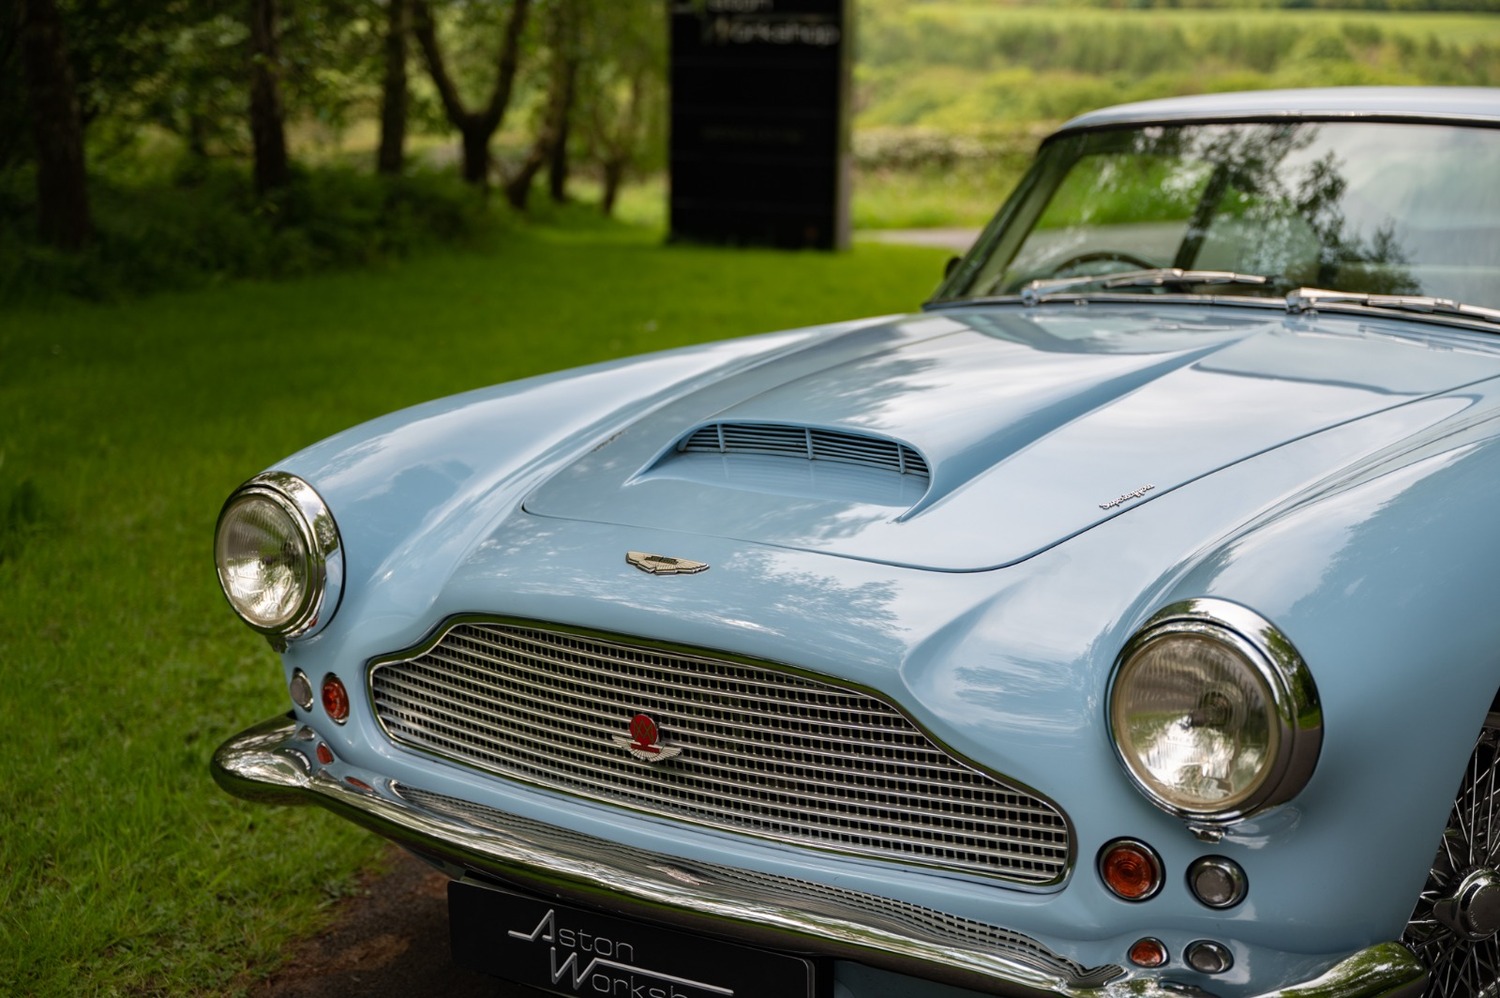 Driving a one-off Aston Martin DB5 V8 prototype